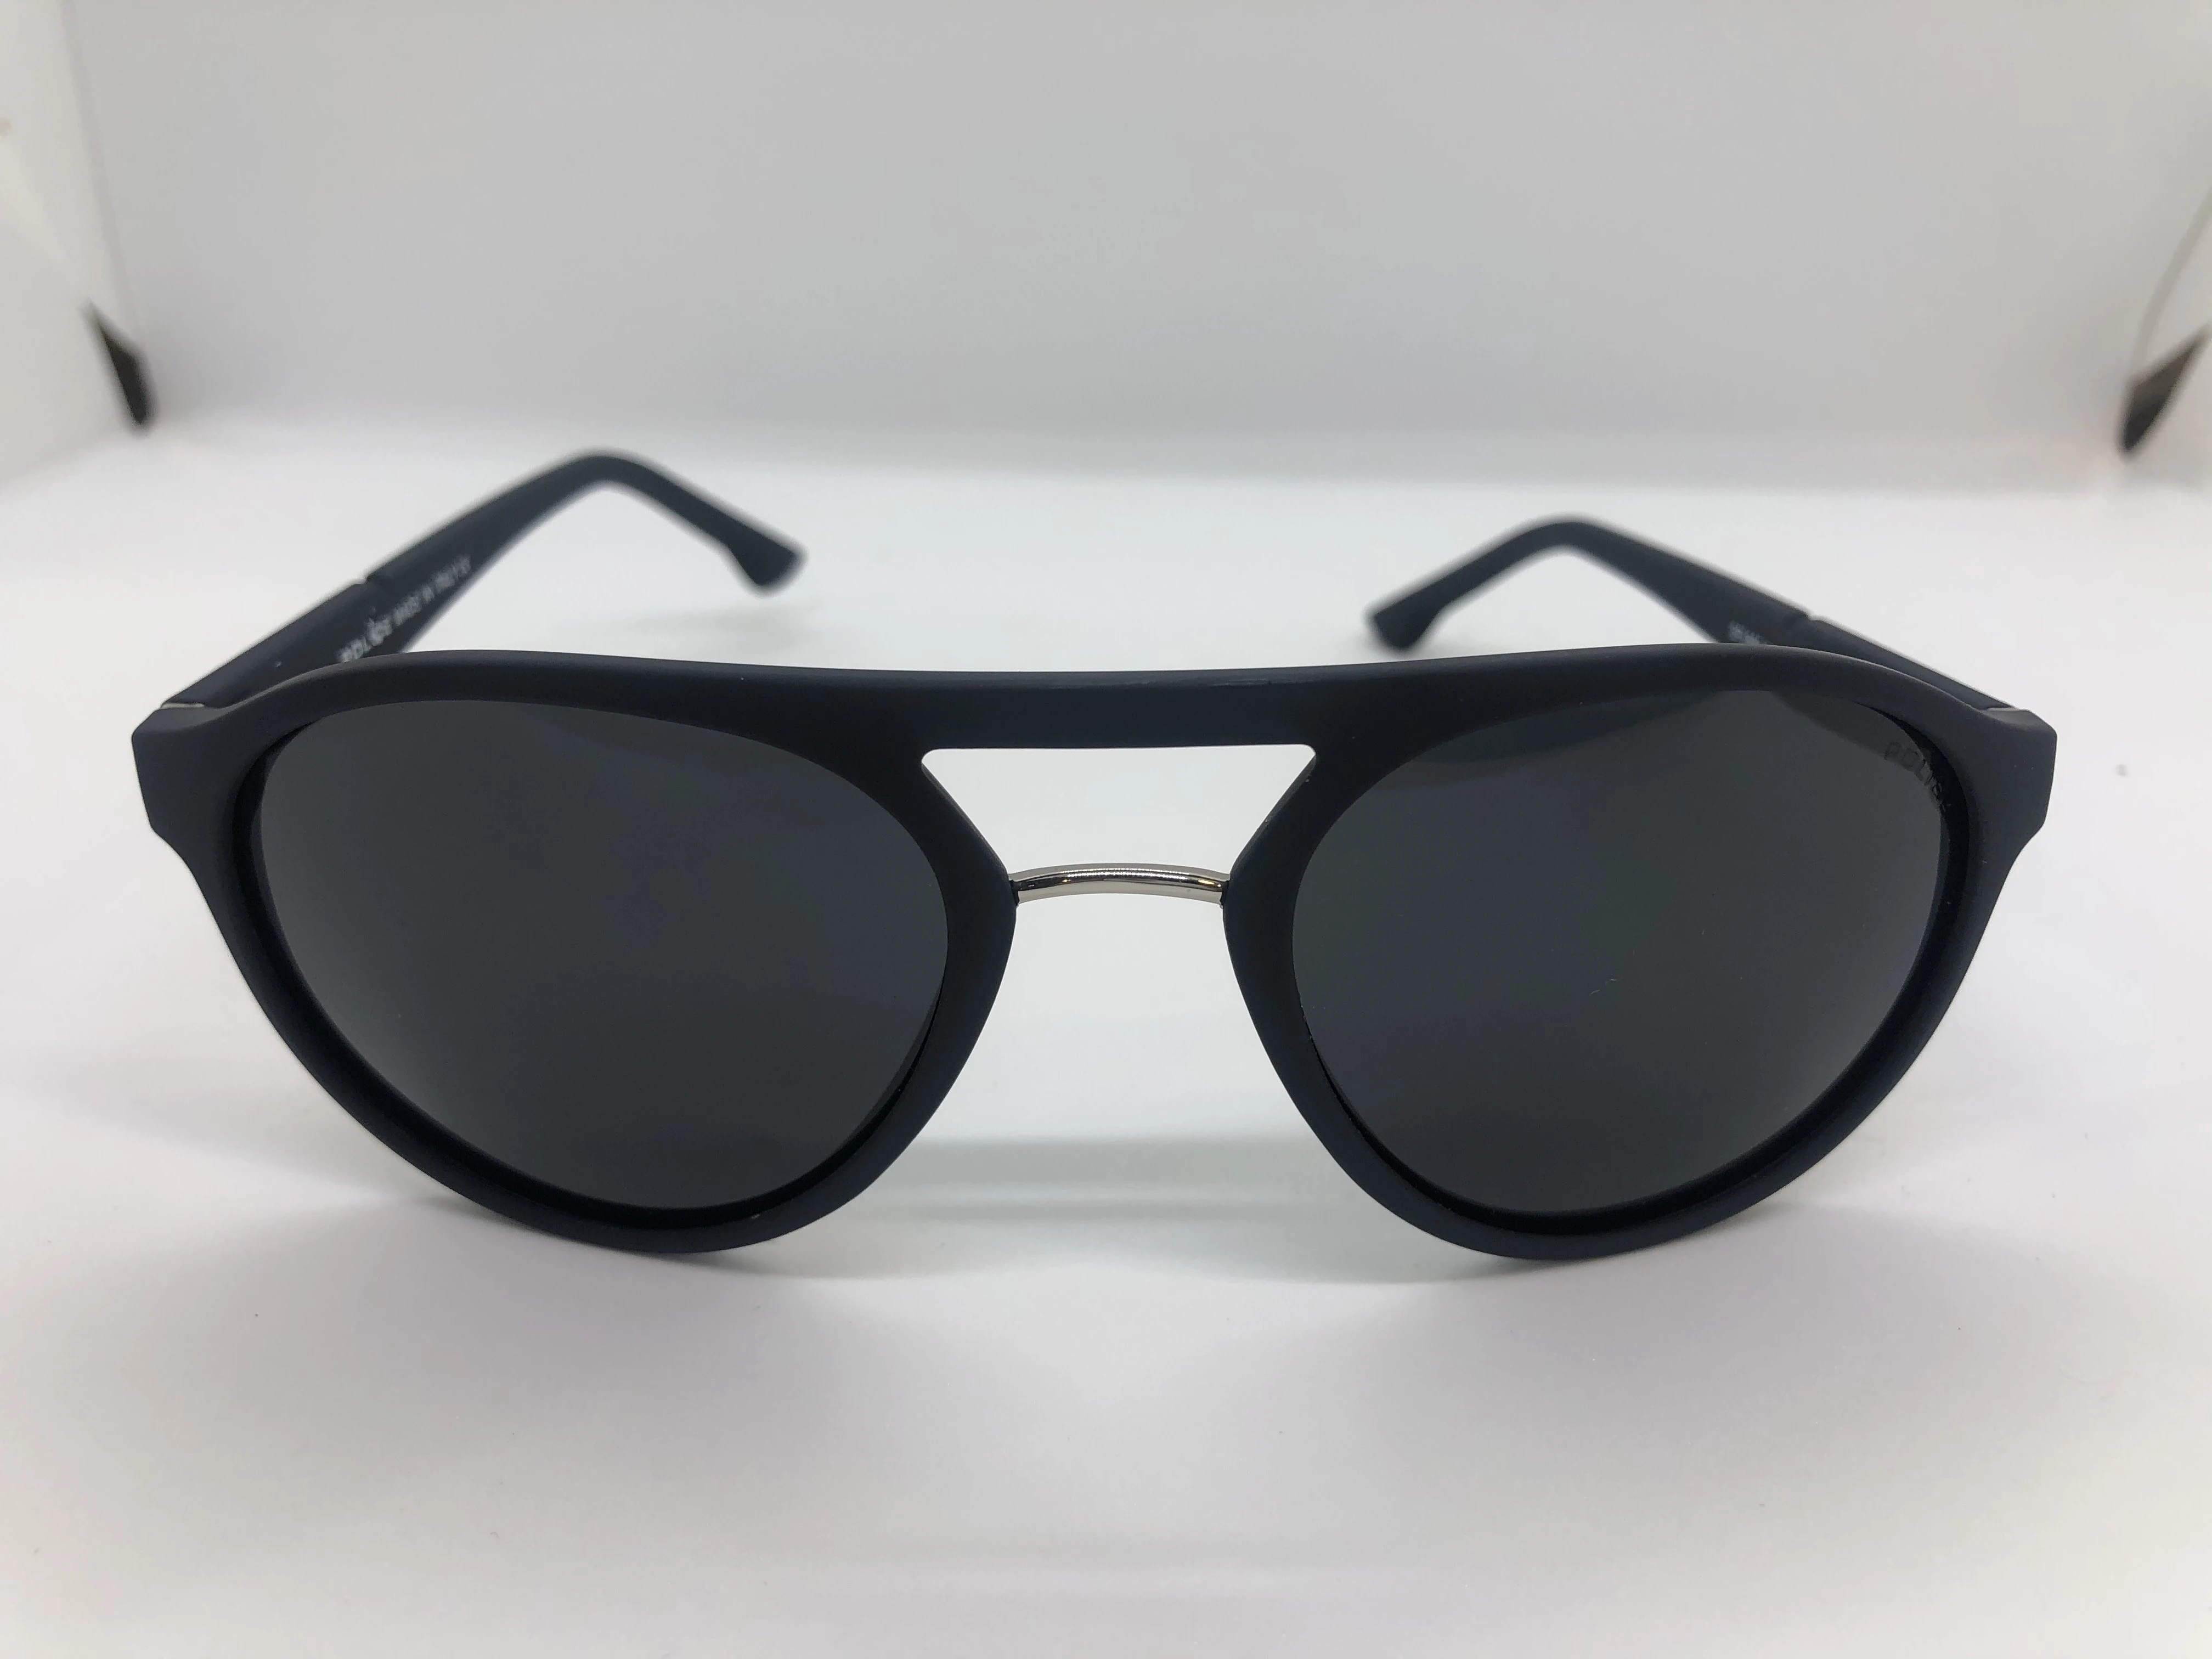 Sunglasses - from police - with a blue polycarbonate frame - black lenses - and a navy polycarbonate arm - for men